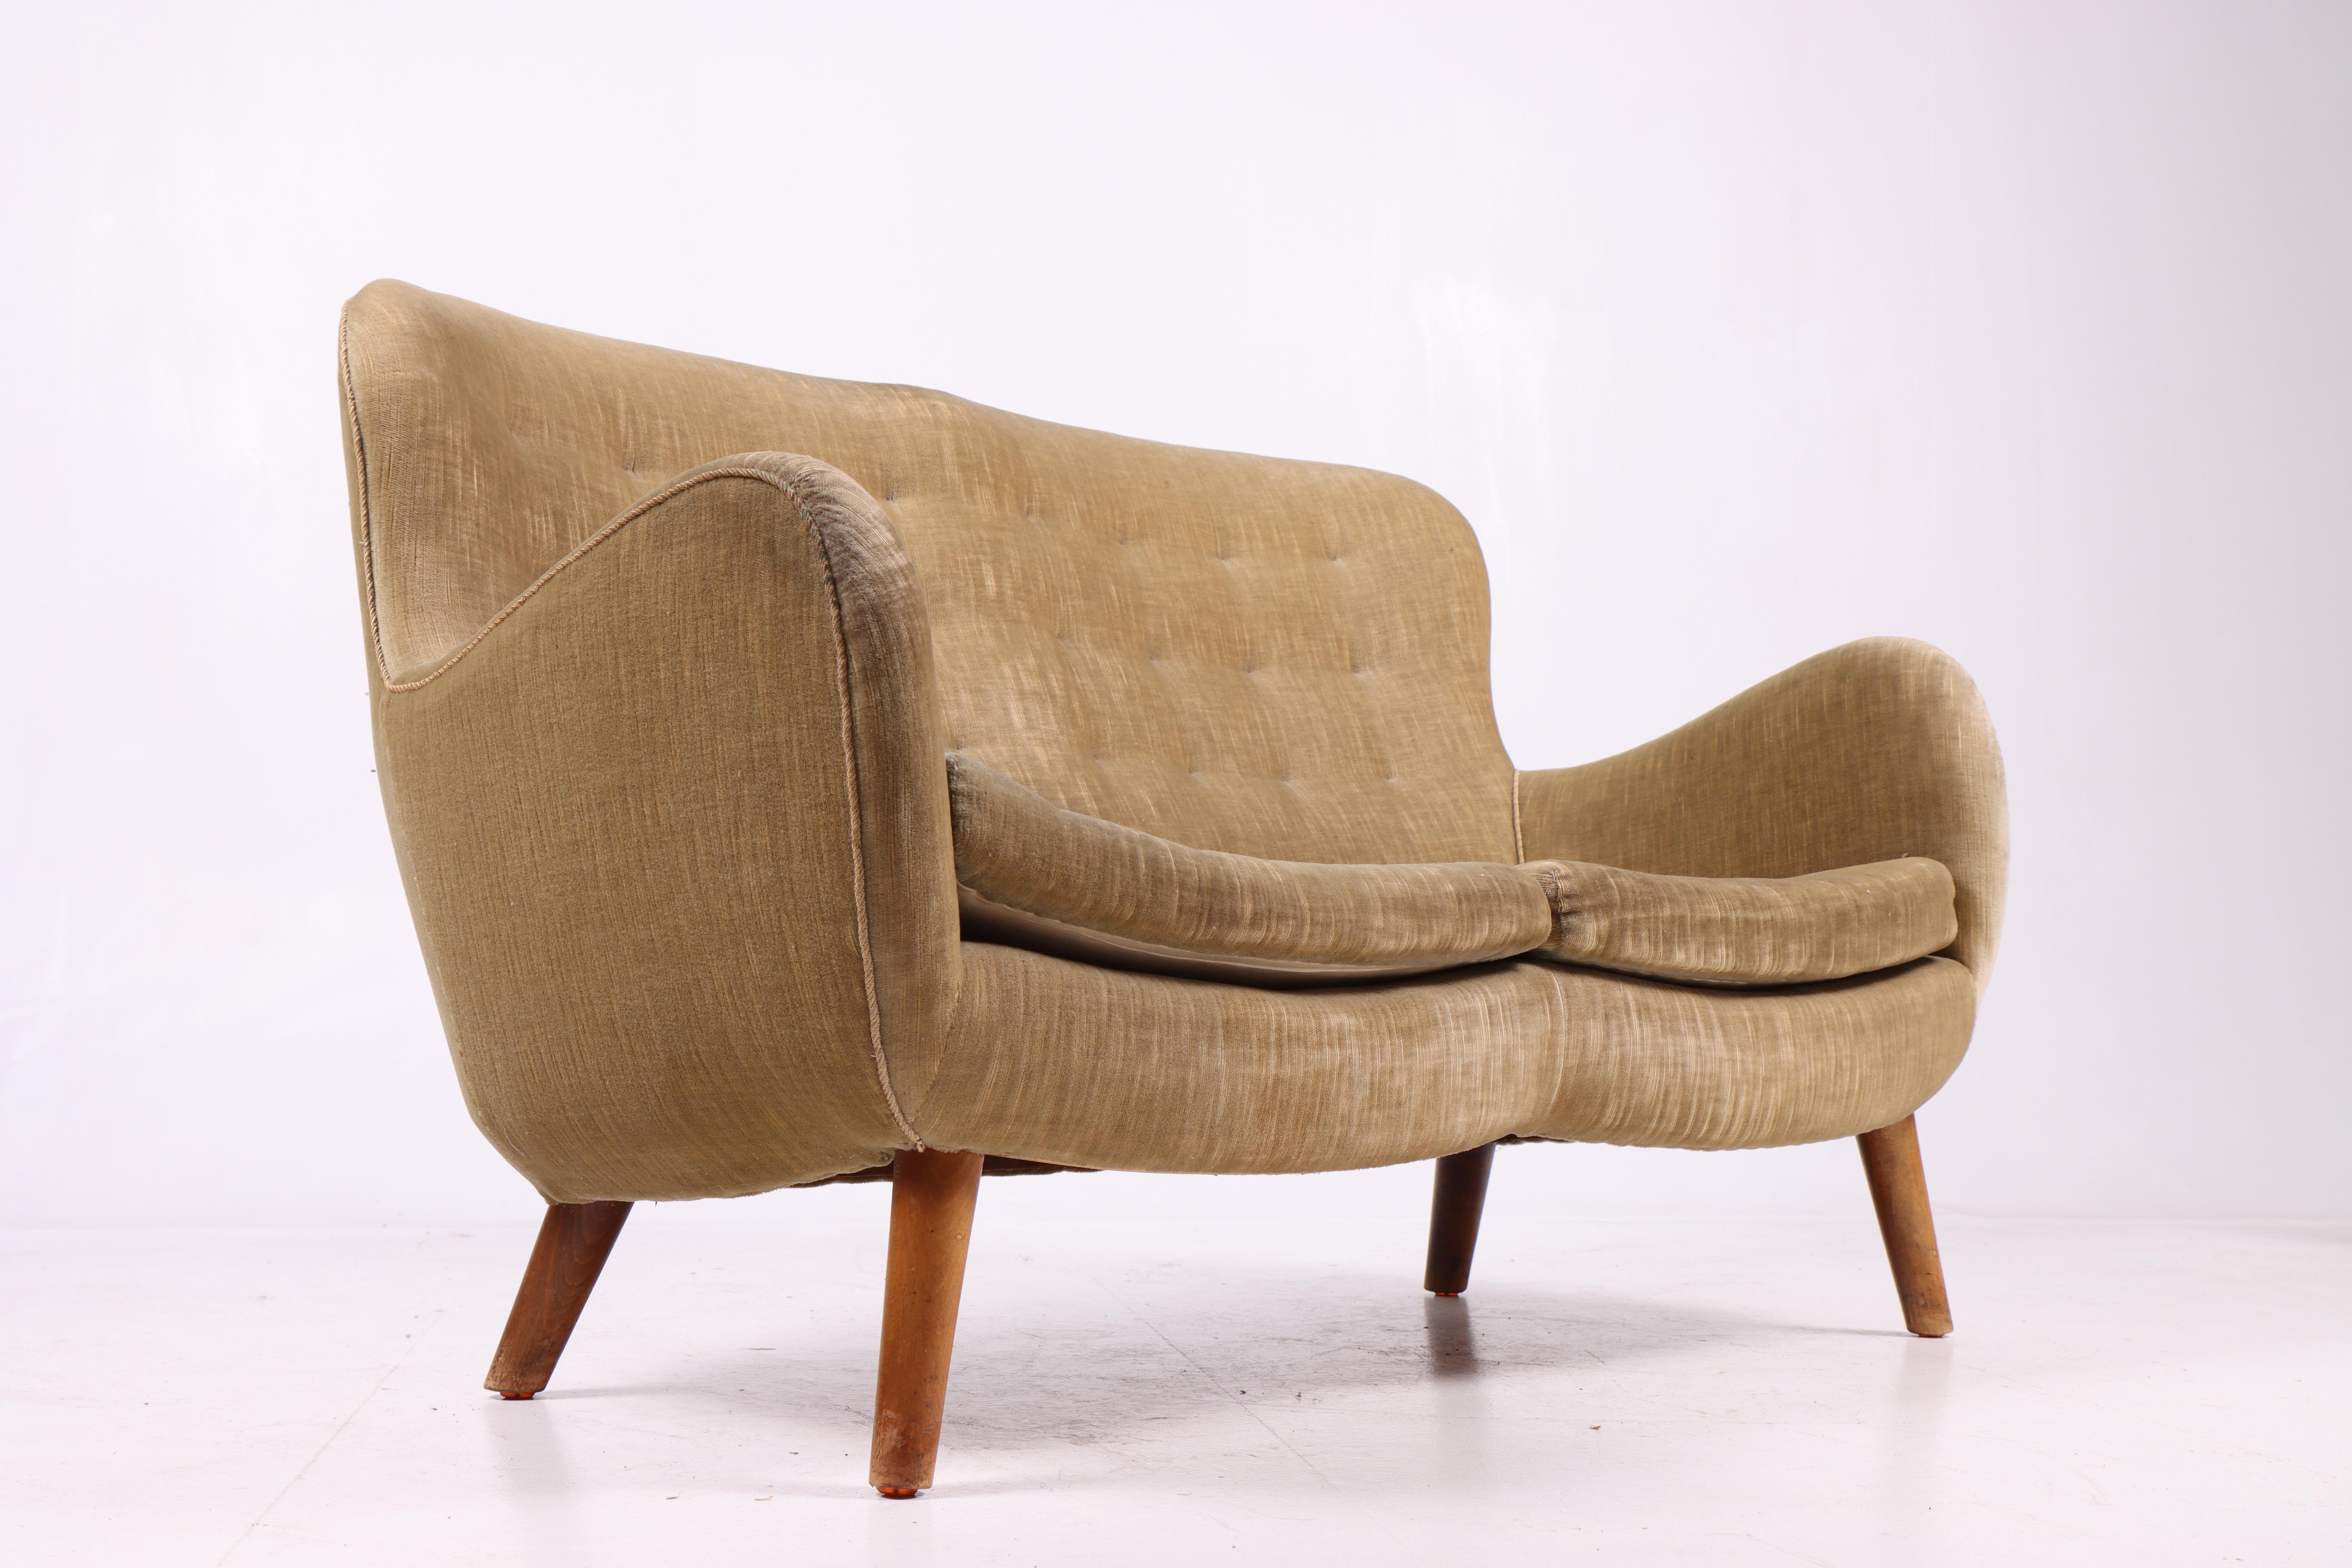 Rare Danish Mid-Century Sofa, 1940s In Good Condition For Sale In Lejre, DK